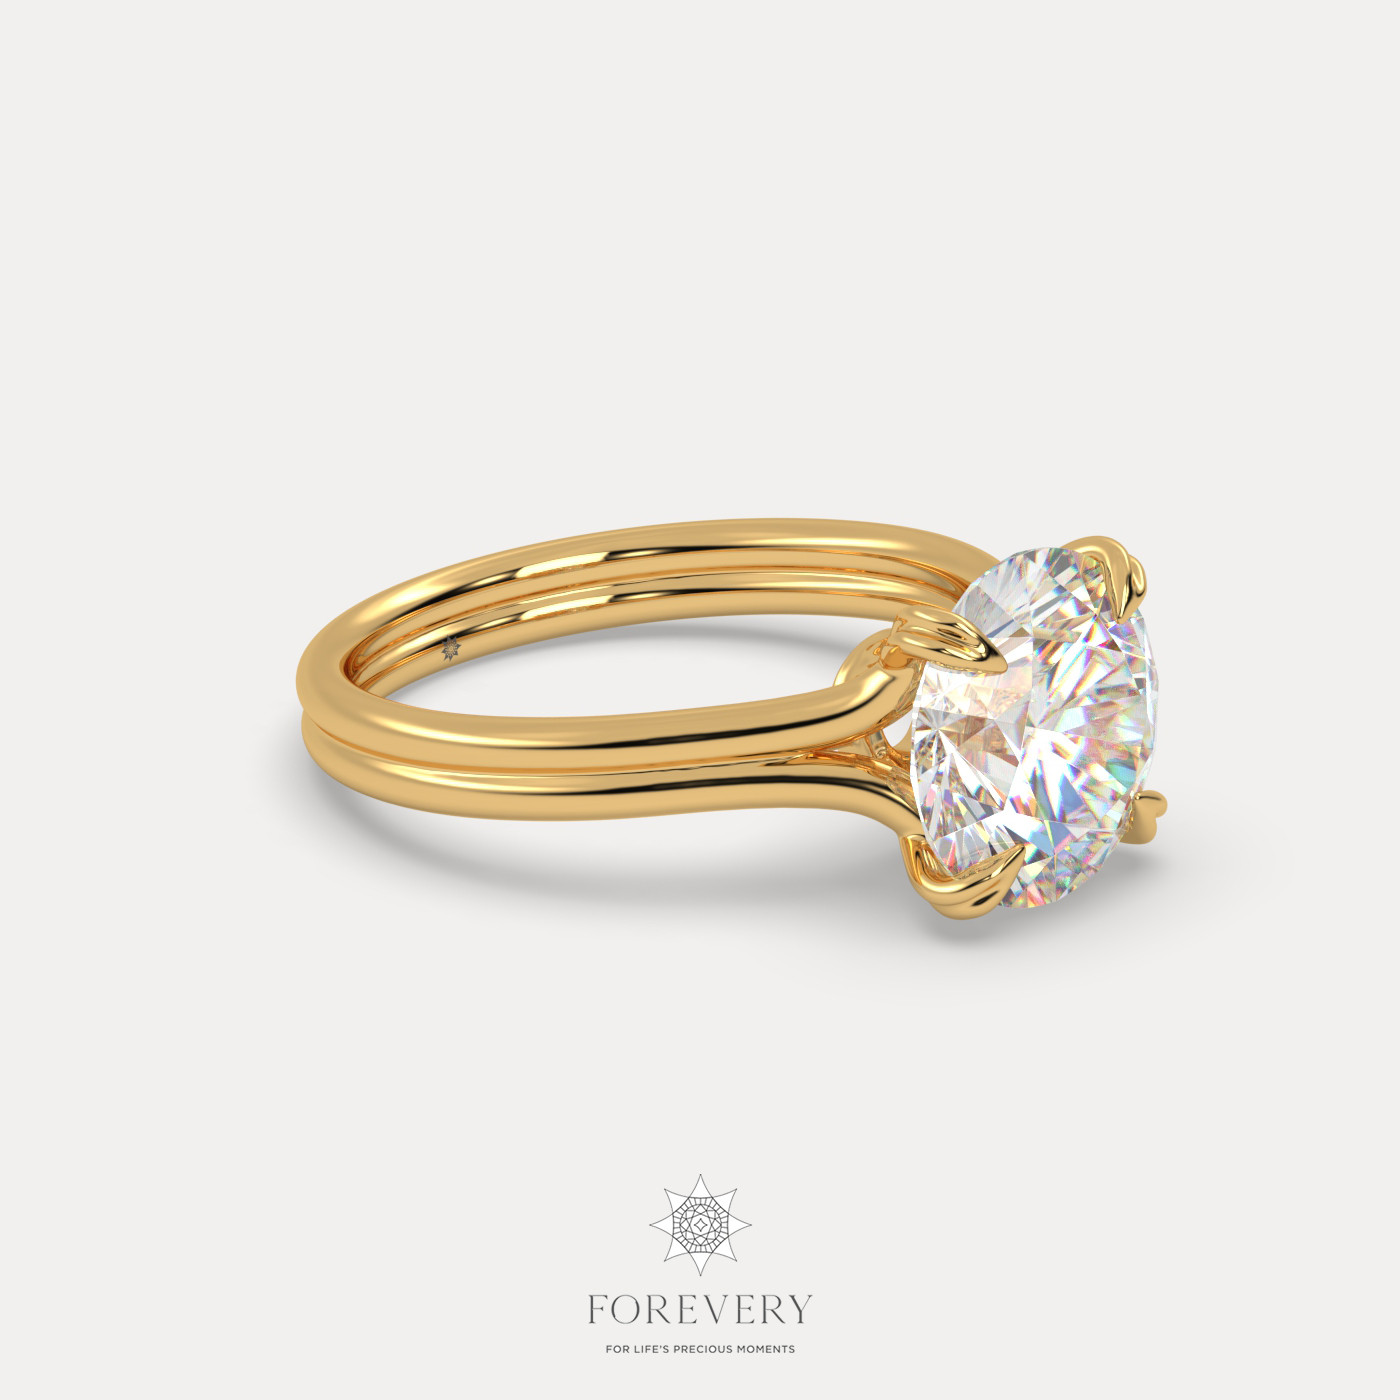 18K YELLOW GOLD Round Cut Diamond Solitaire Engagament Ring